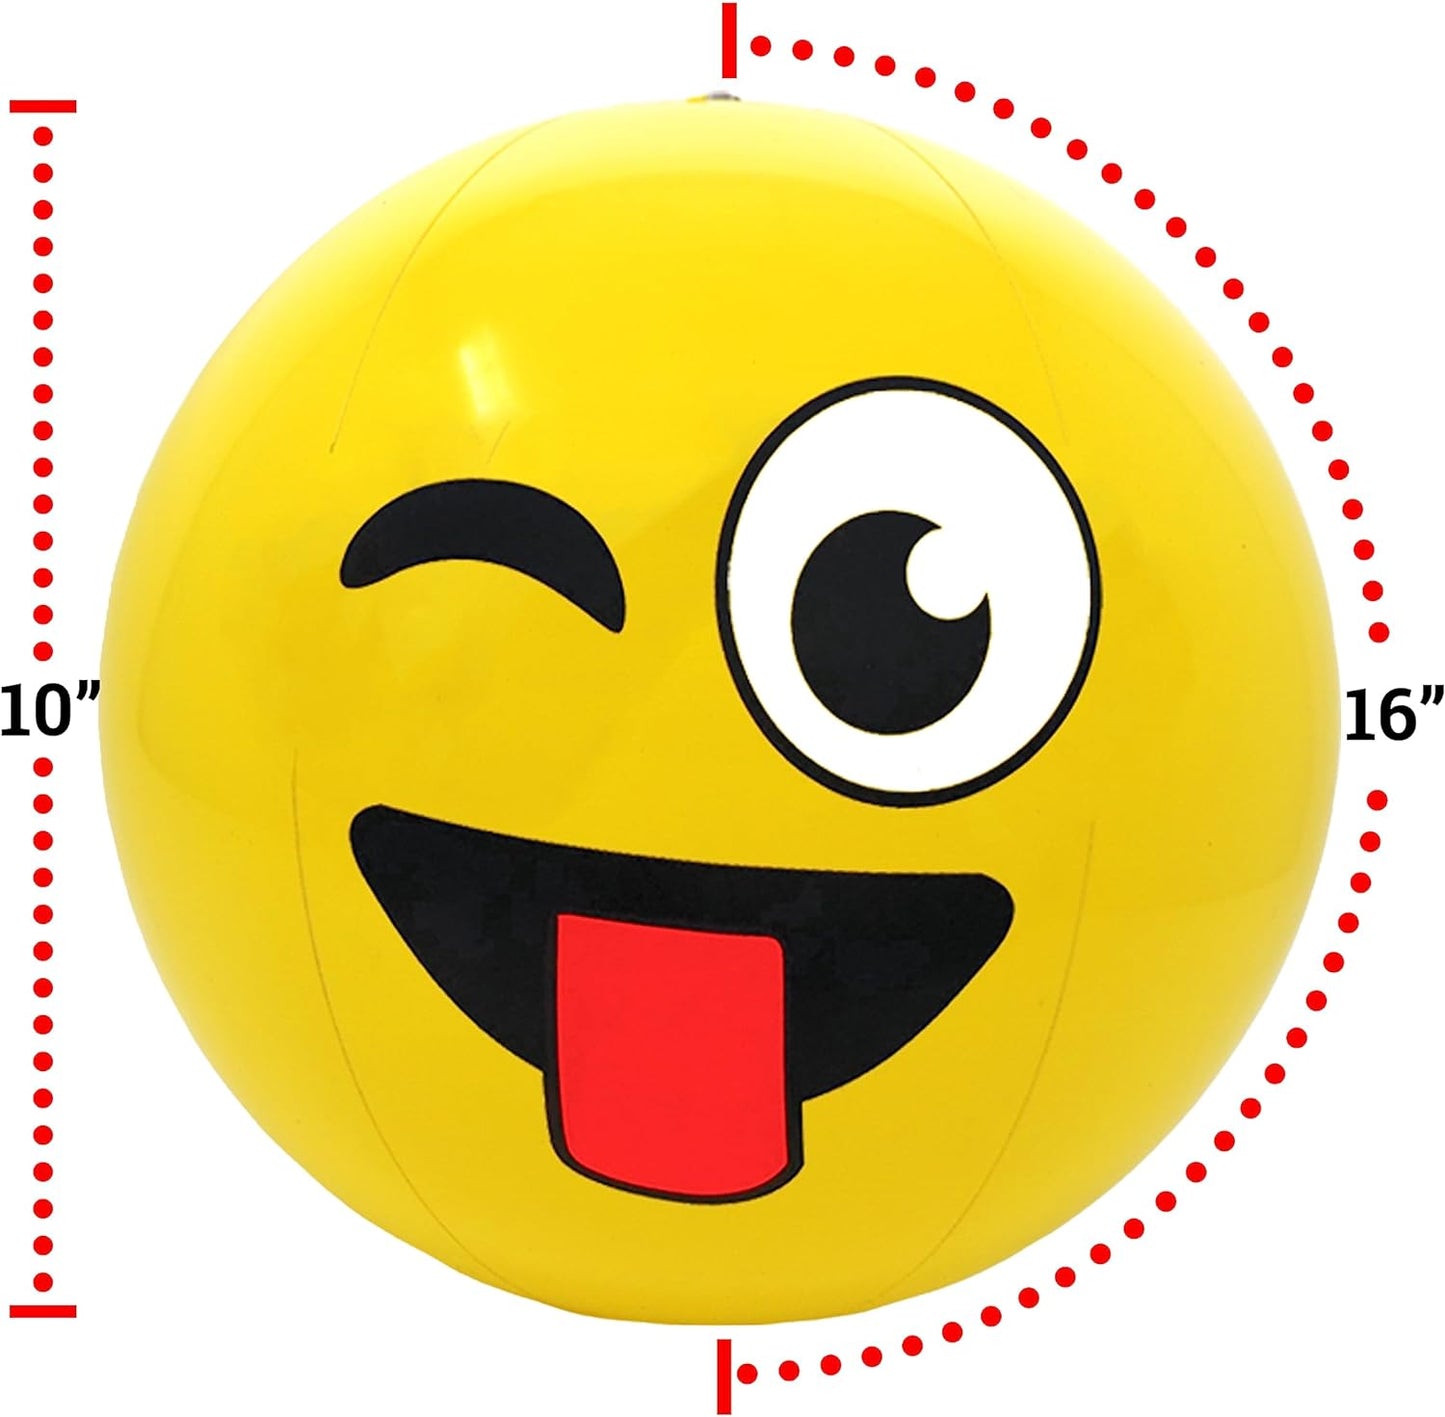 16" Emoticon Party Pack Inflatable Beach Balls - Beach Pool Party Toys (12 Pack)